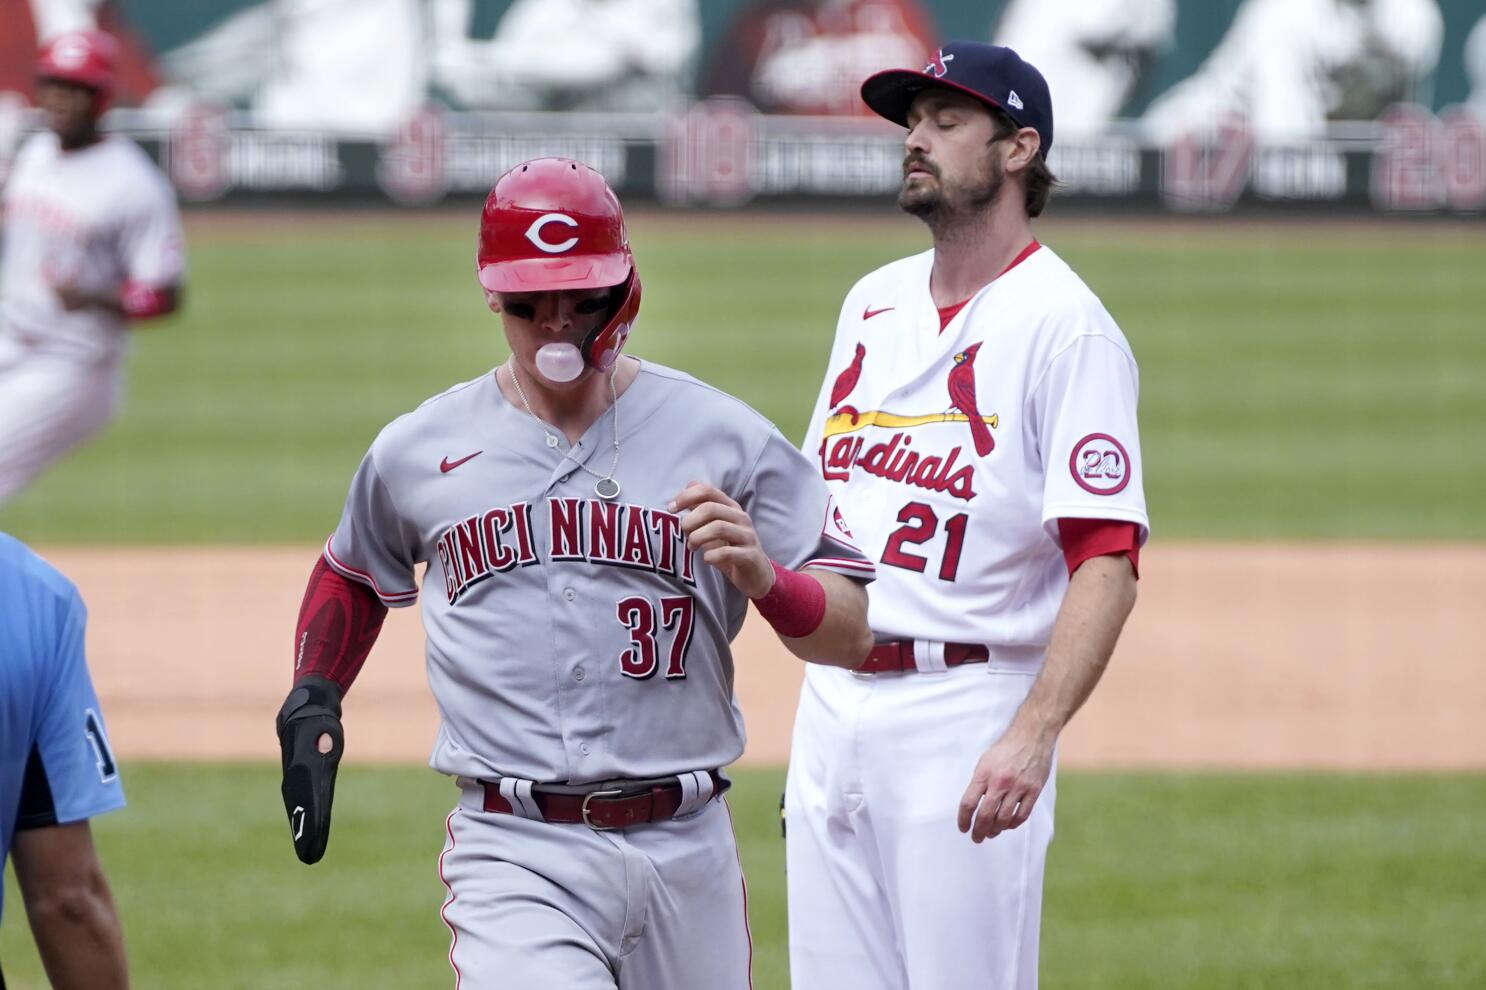 Cincinnati Reds' playoff hopes take another hit in 4-3 loss to Cards